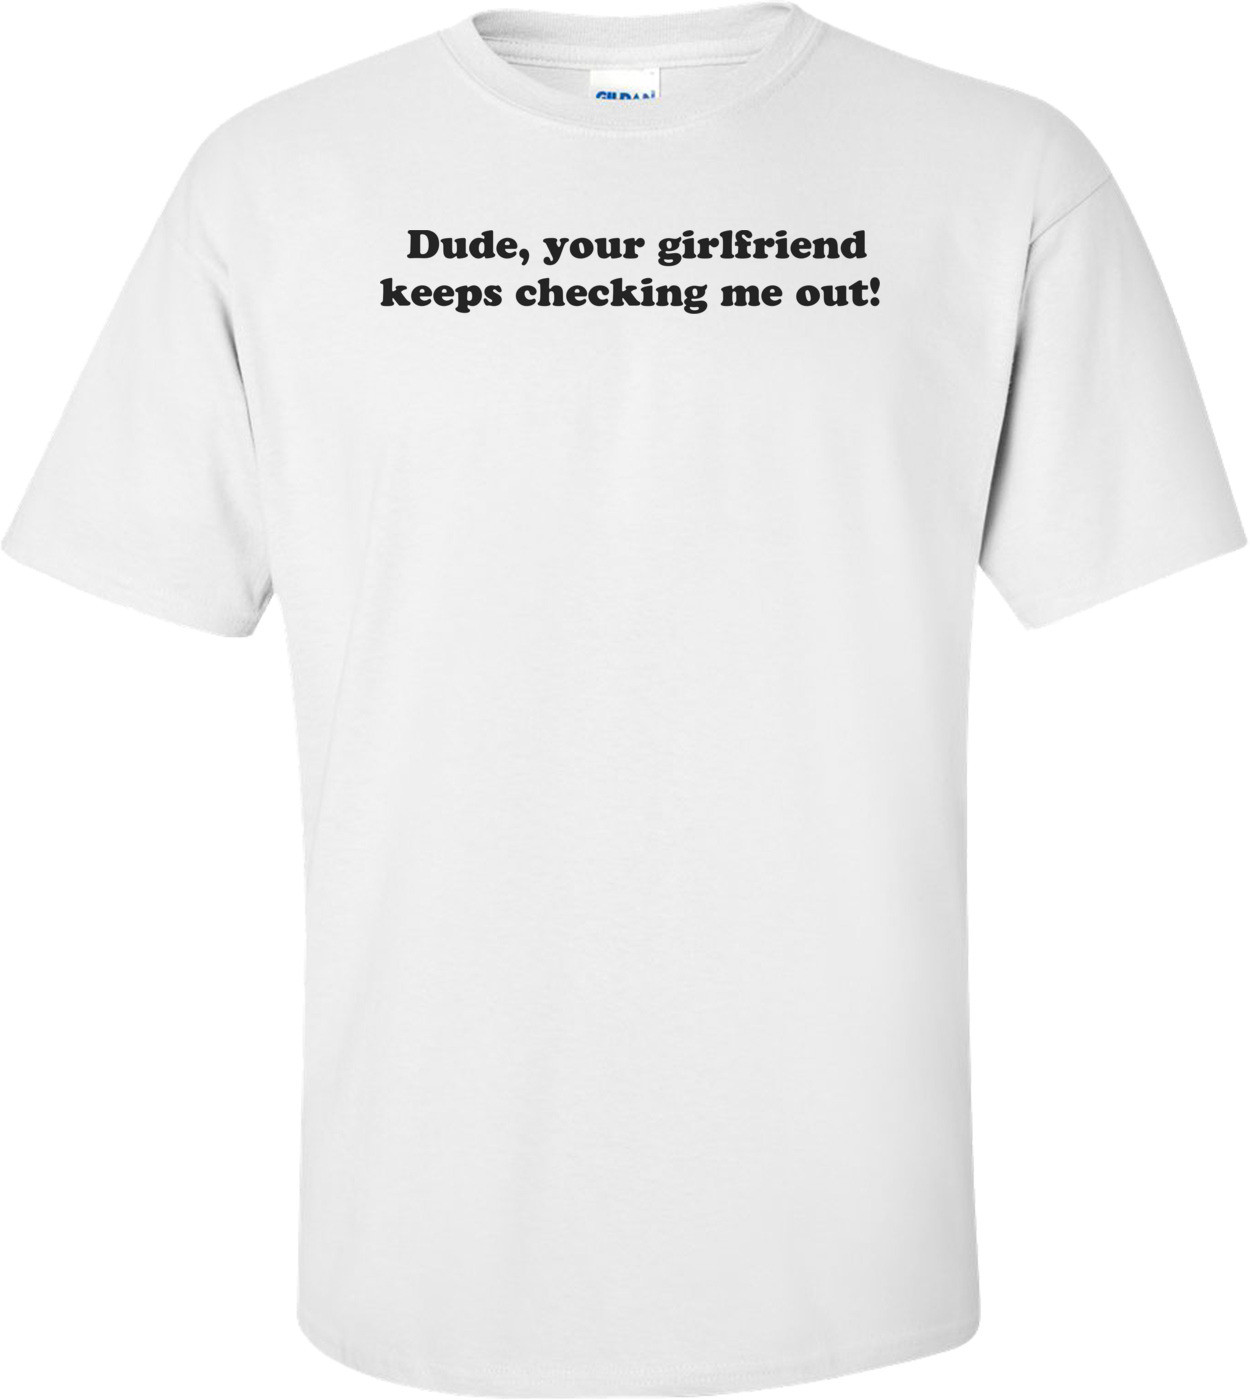  Dude, your girlfriend keeps checking me out! T-Shirt